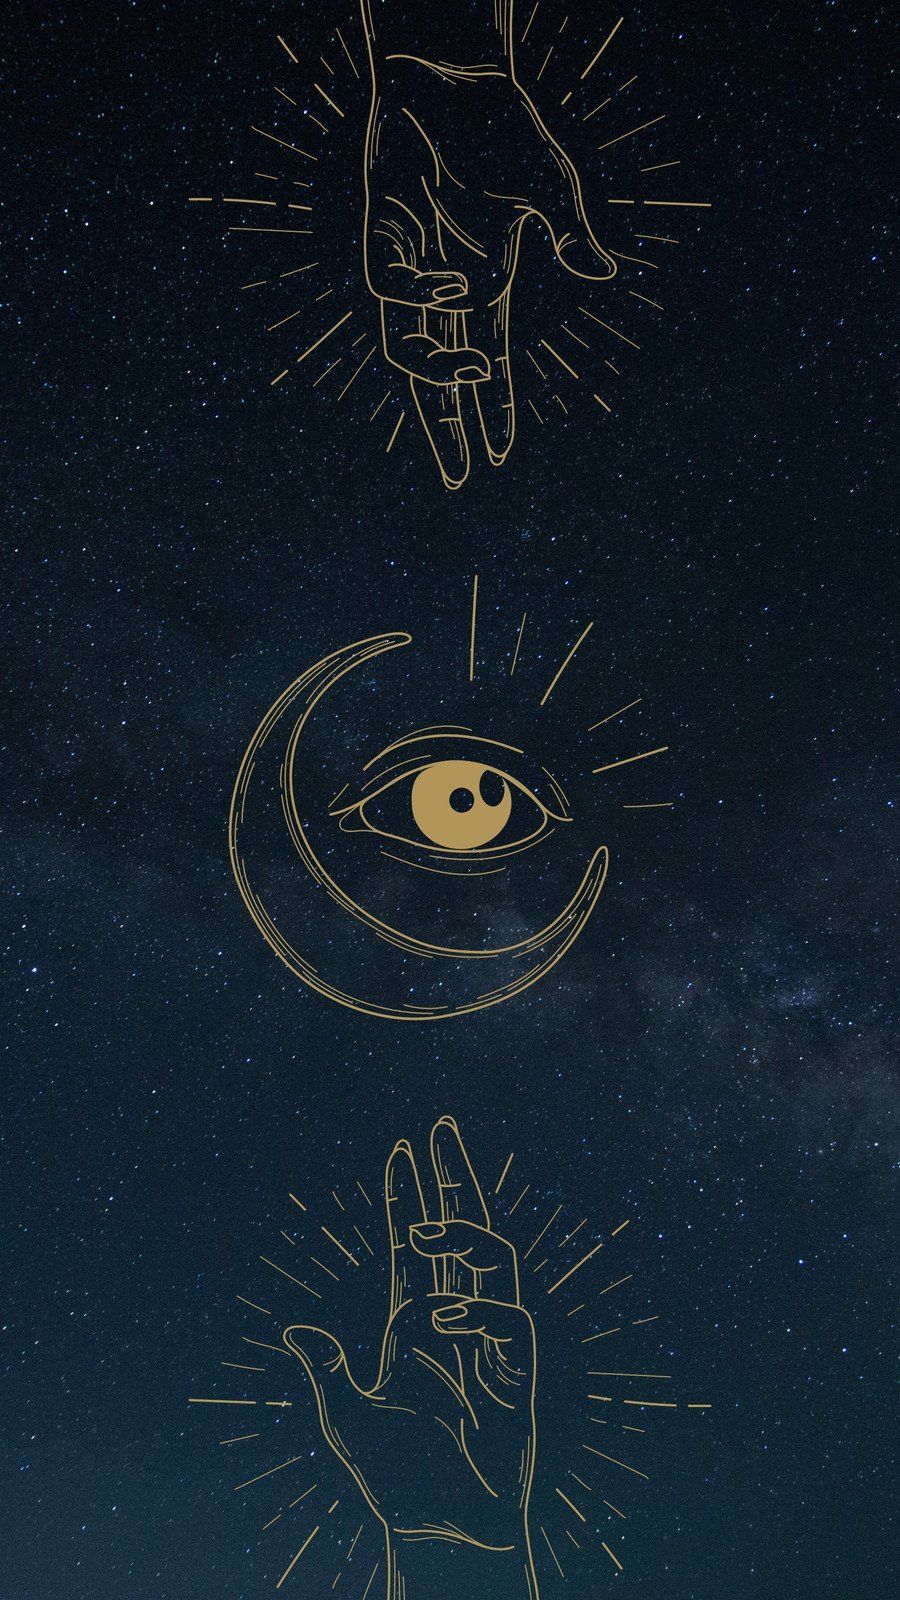 An illustration of hands and an eye on a starry background - Spiritual